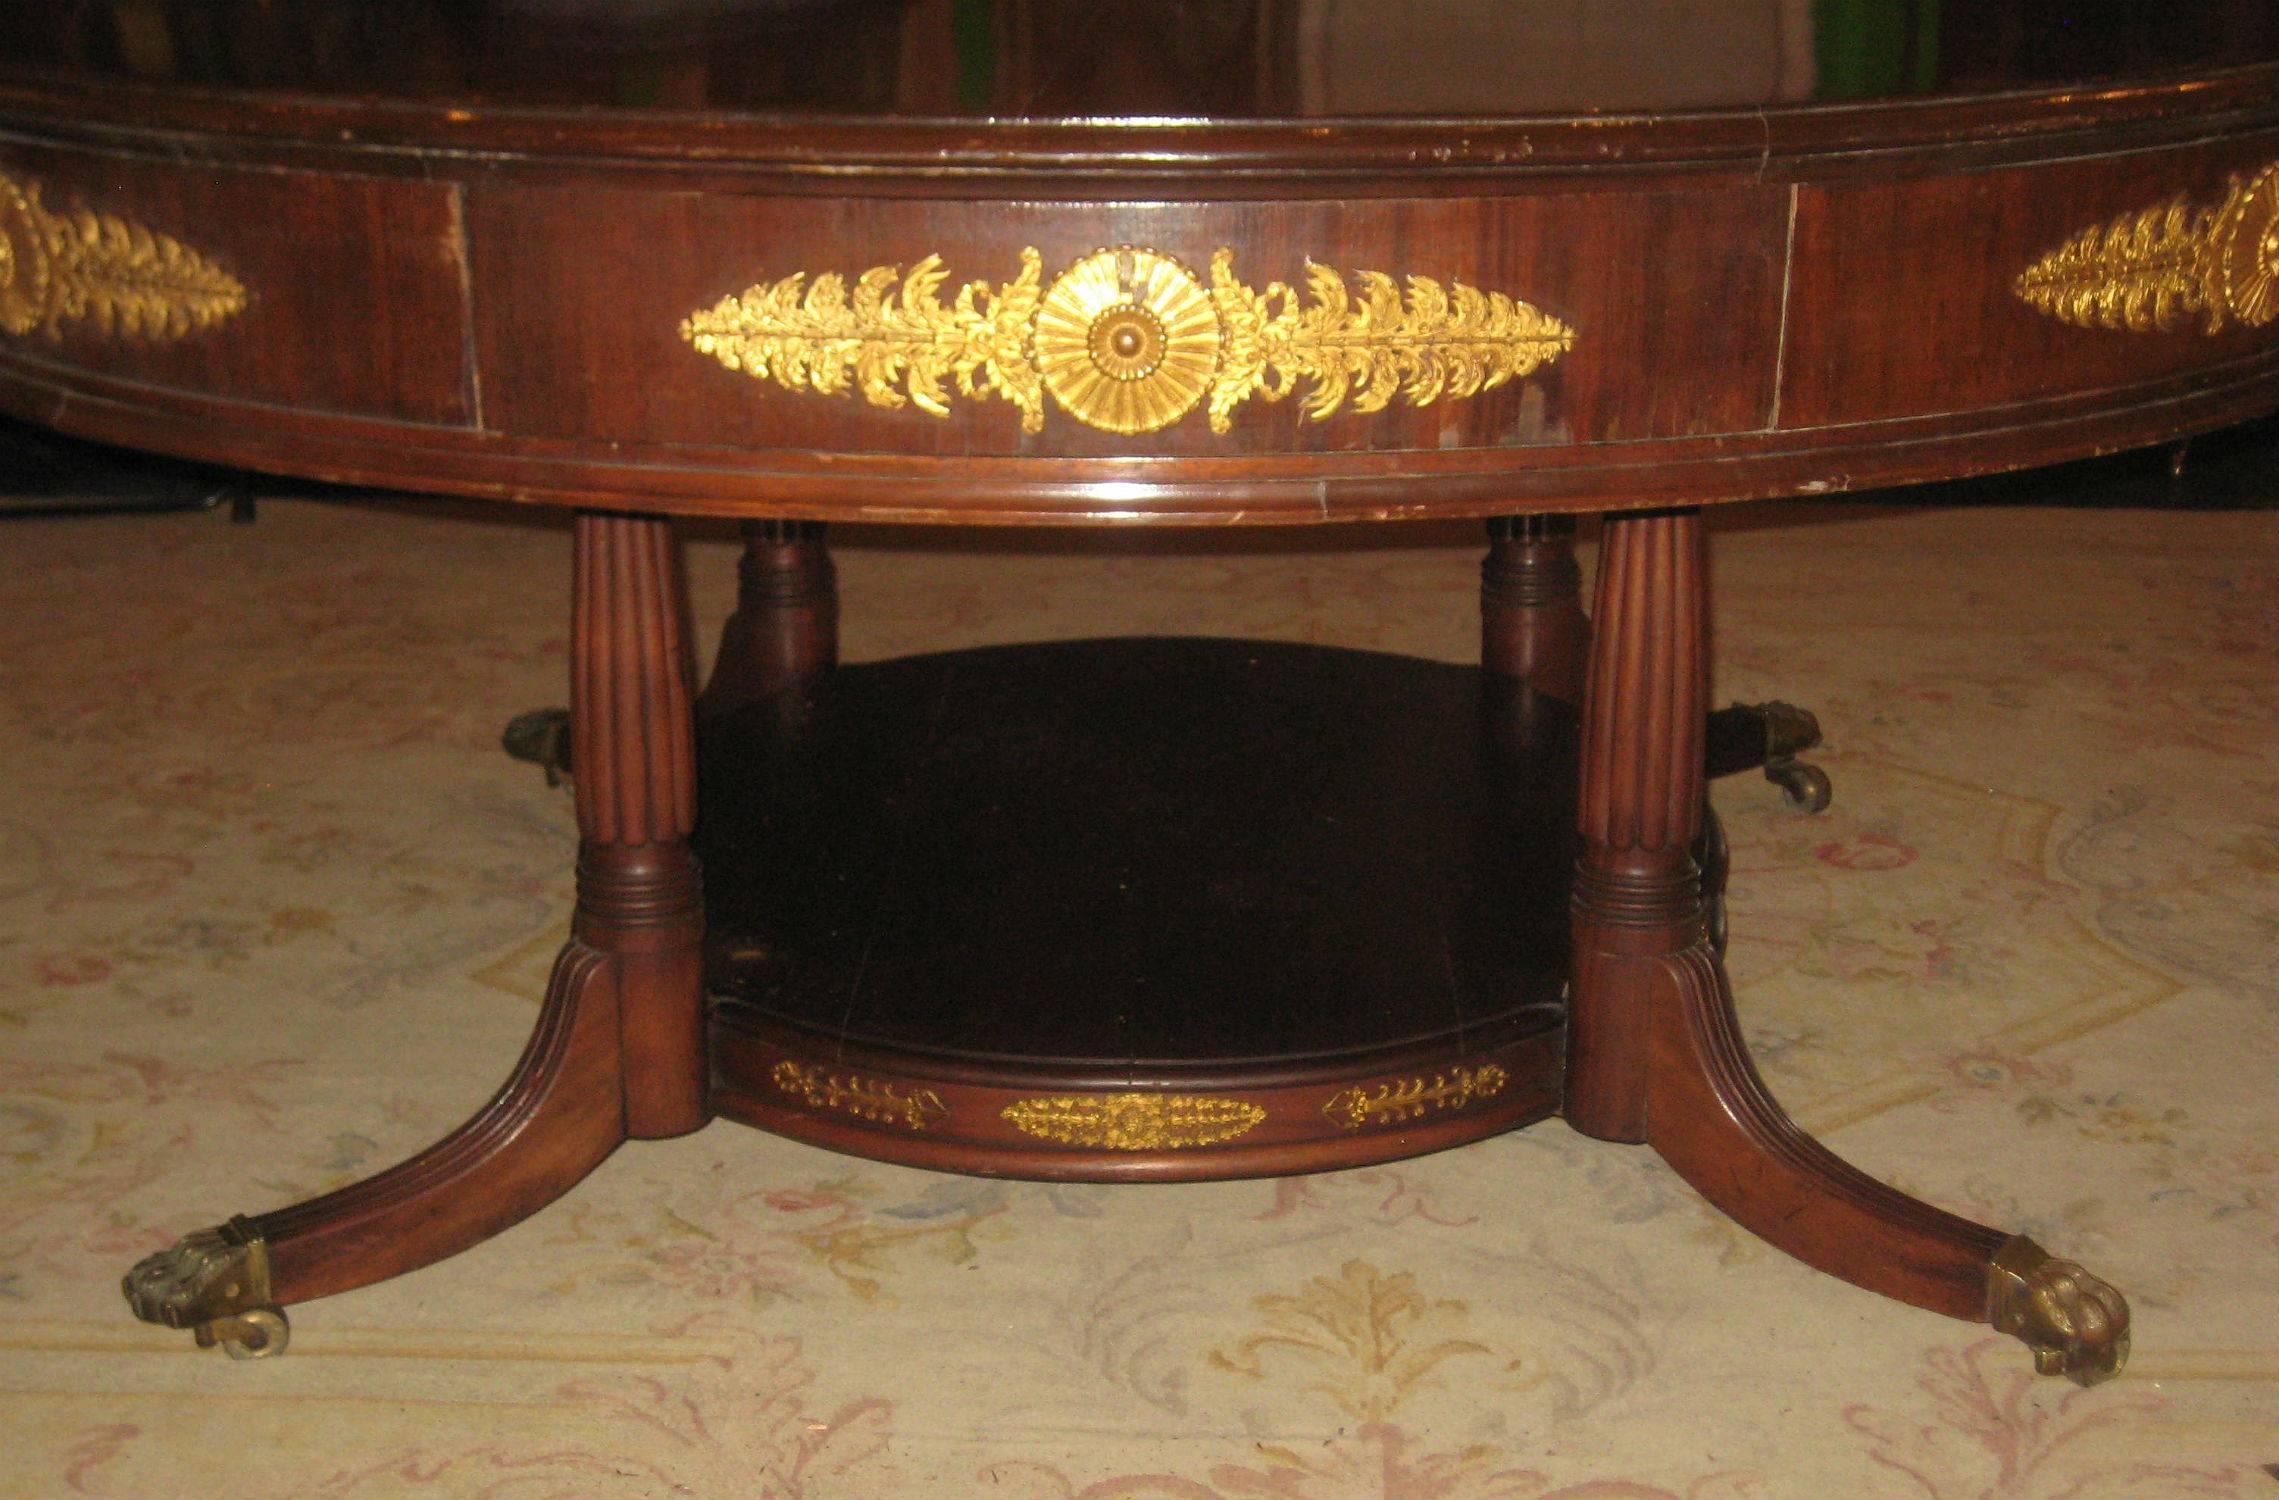 Large French Empire mahogany and gilt bronze-mounted four-drawer center table raised on fluted legs with a stretcher shelf base; the underside of the legs with the original iron leg braces, the down swept legs terminating with brass paws and casters.